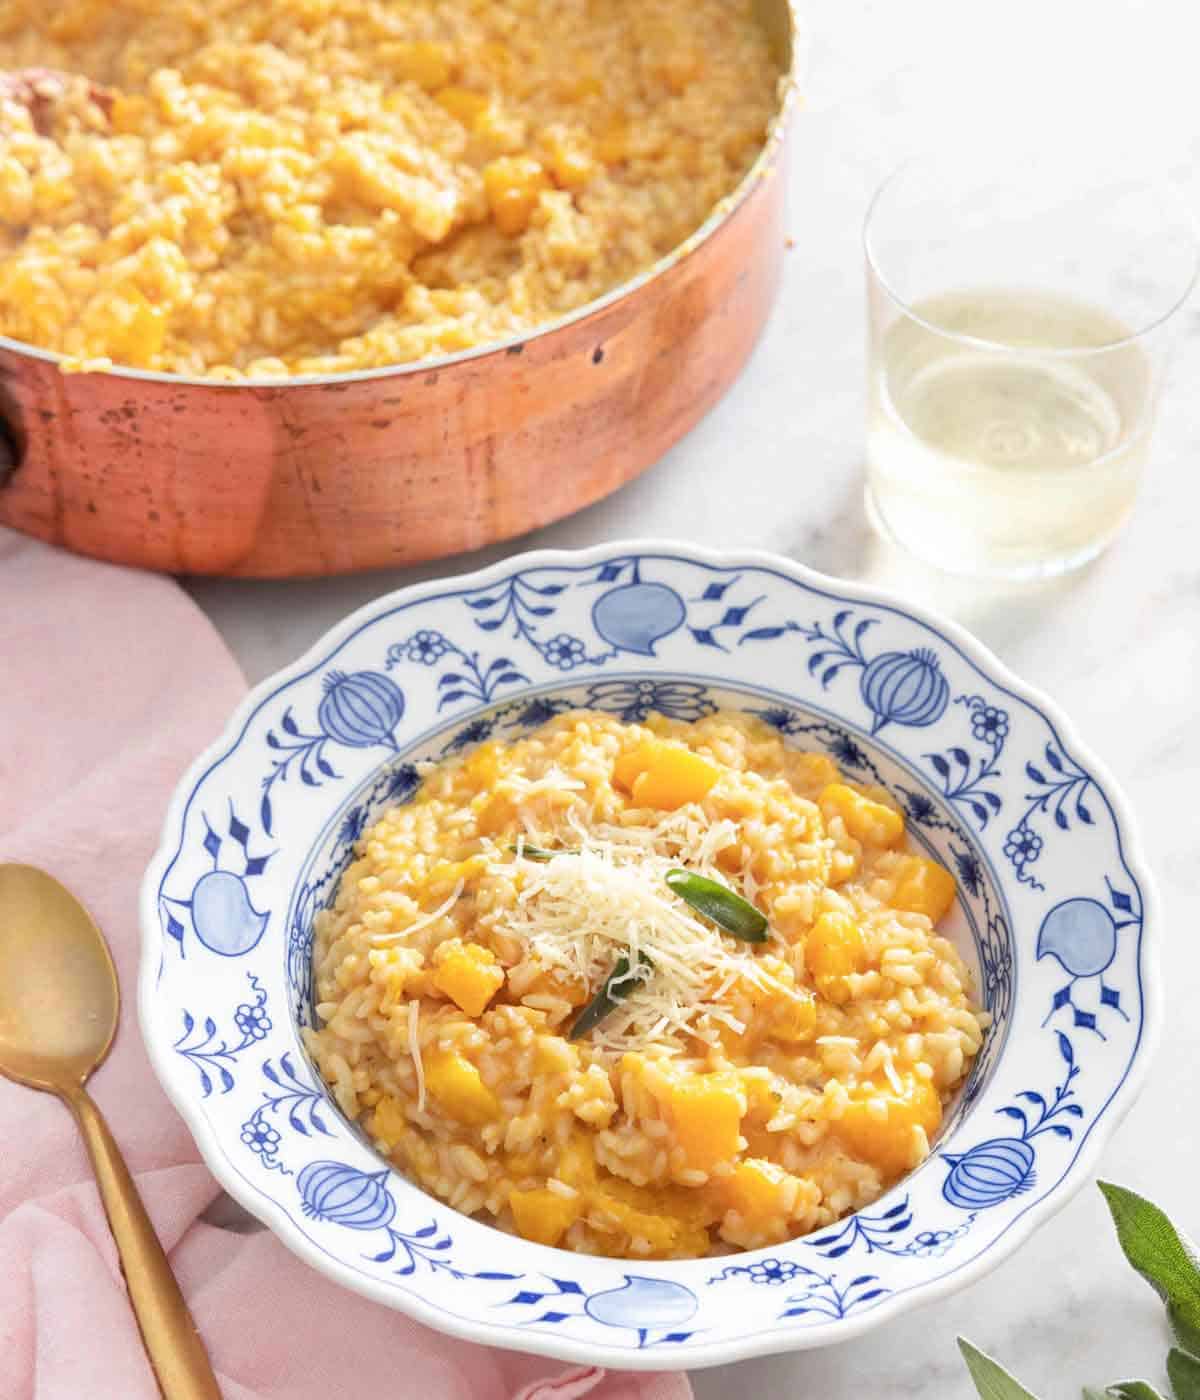 A bowl of butternut squash risotto with shredded cheese sprinkled on top by a glass and pot.